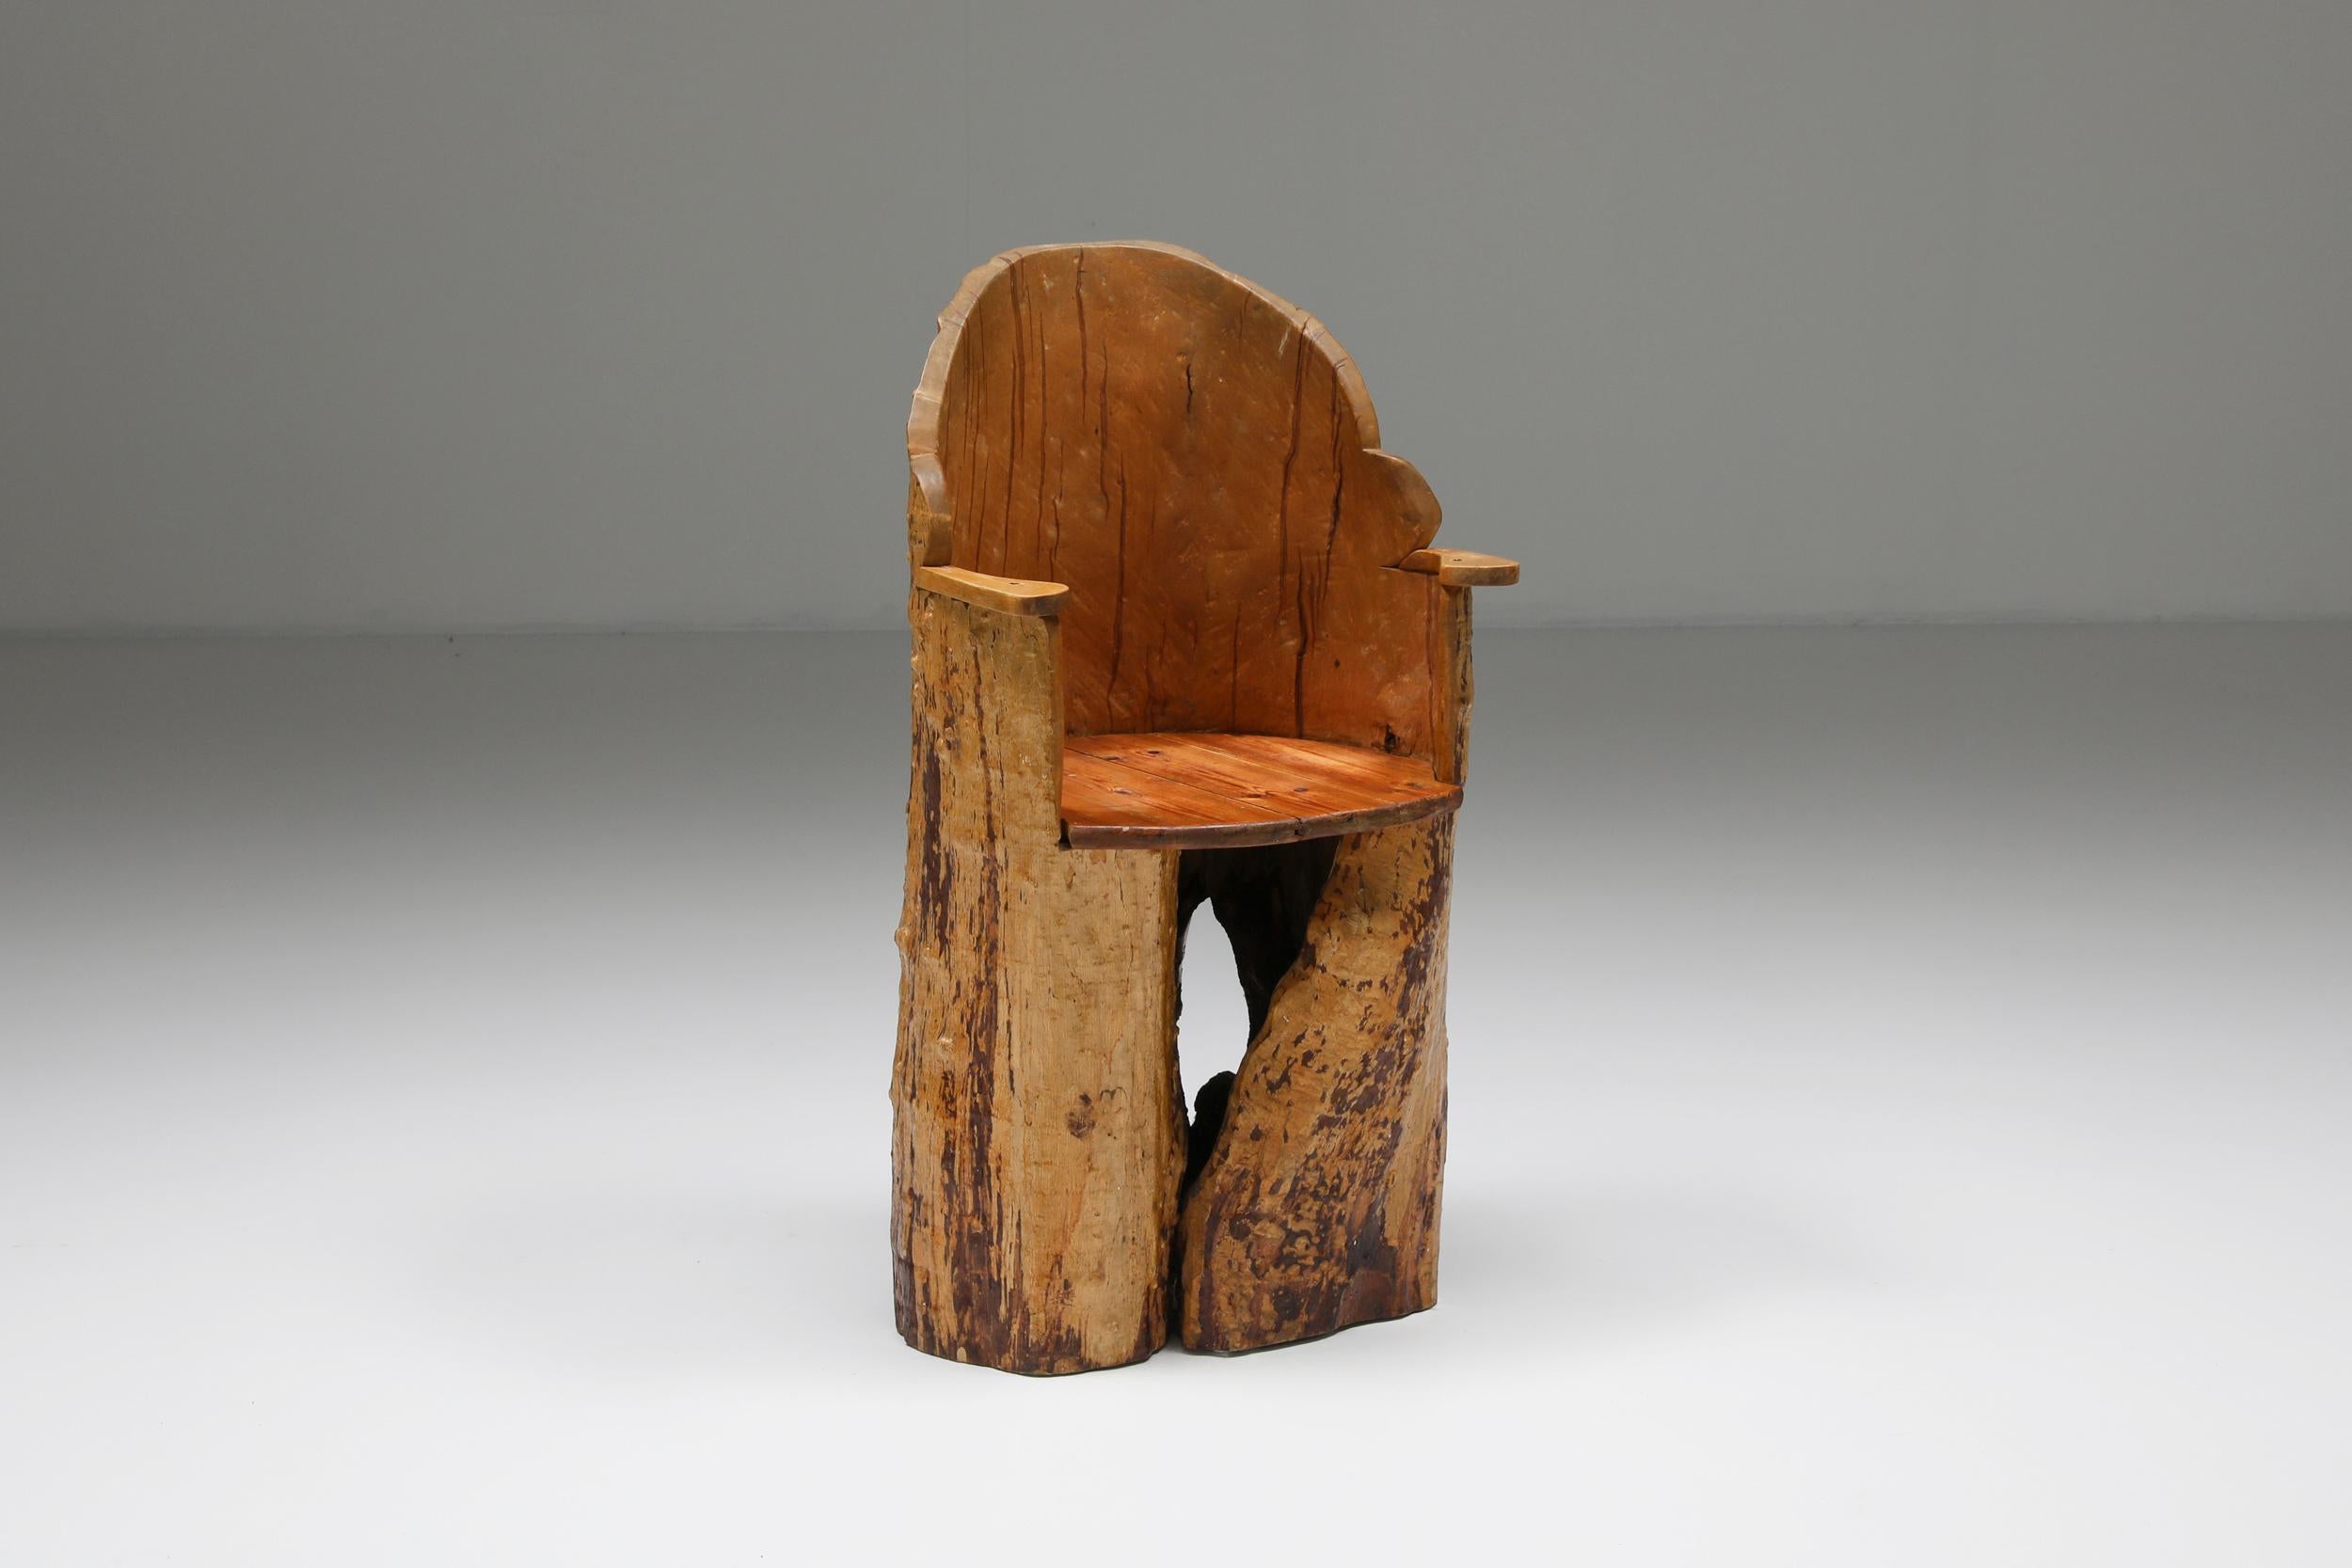 Rustic, wabi-sabi, side chair, Japanese inspired design

This wooden chair perfectly embodies the enduring Japanese concept of 'wabi-sabi'. Made from an ancient piece of wood characterized by significant fissures and gaps, the artist organically